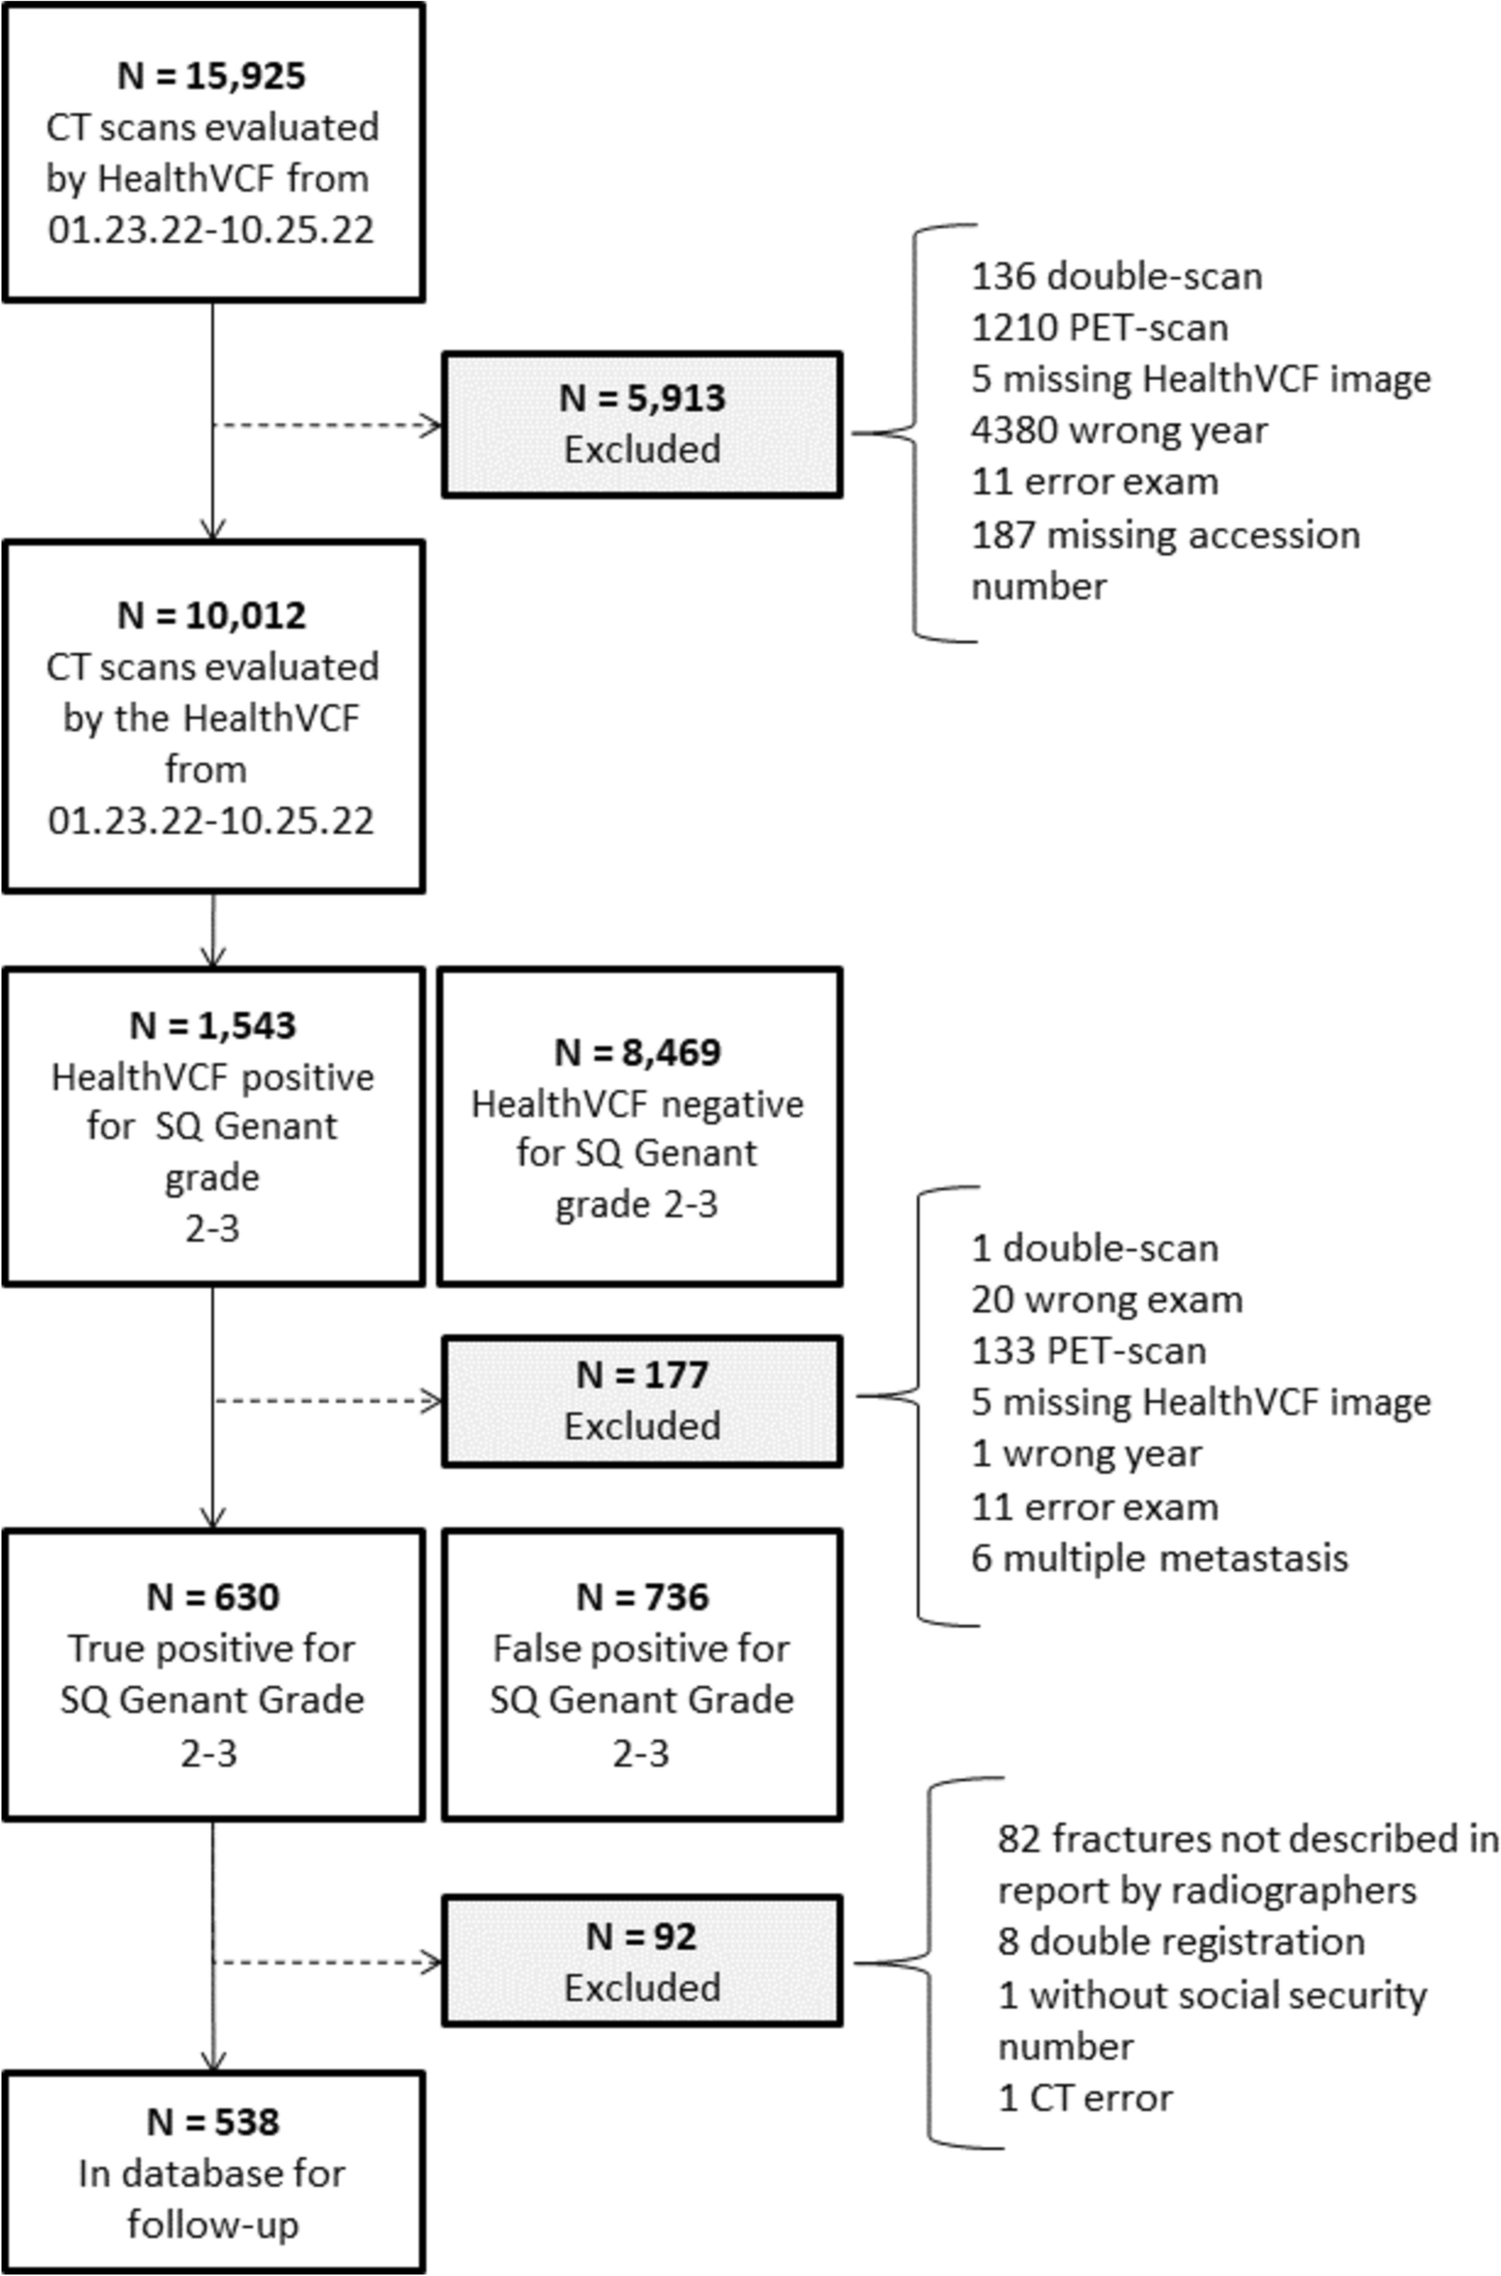 Opportunistic Identification of Vertebral Compression Fractures on CT Scans of the Chest and Abdomen, Using an AI Algorithm, in a Real-Life Setting